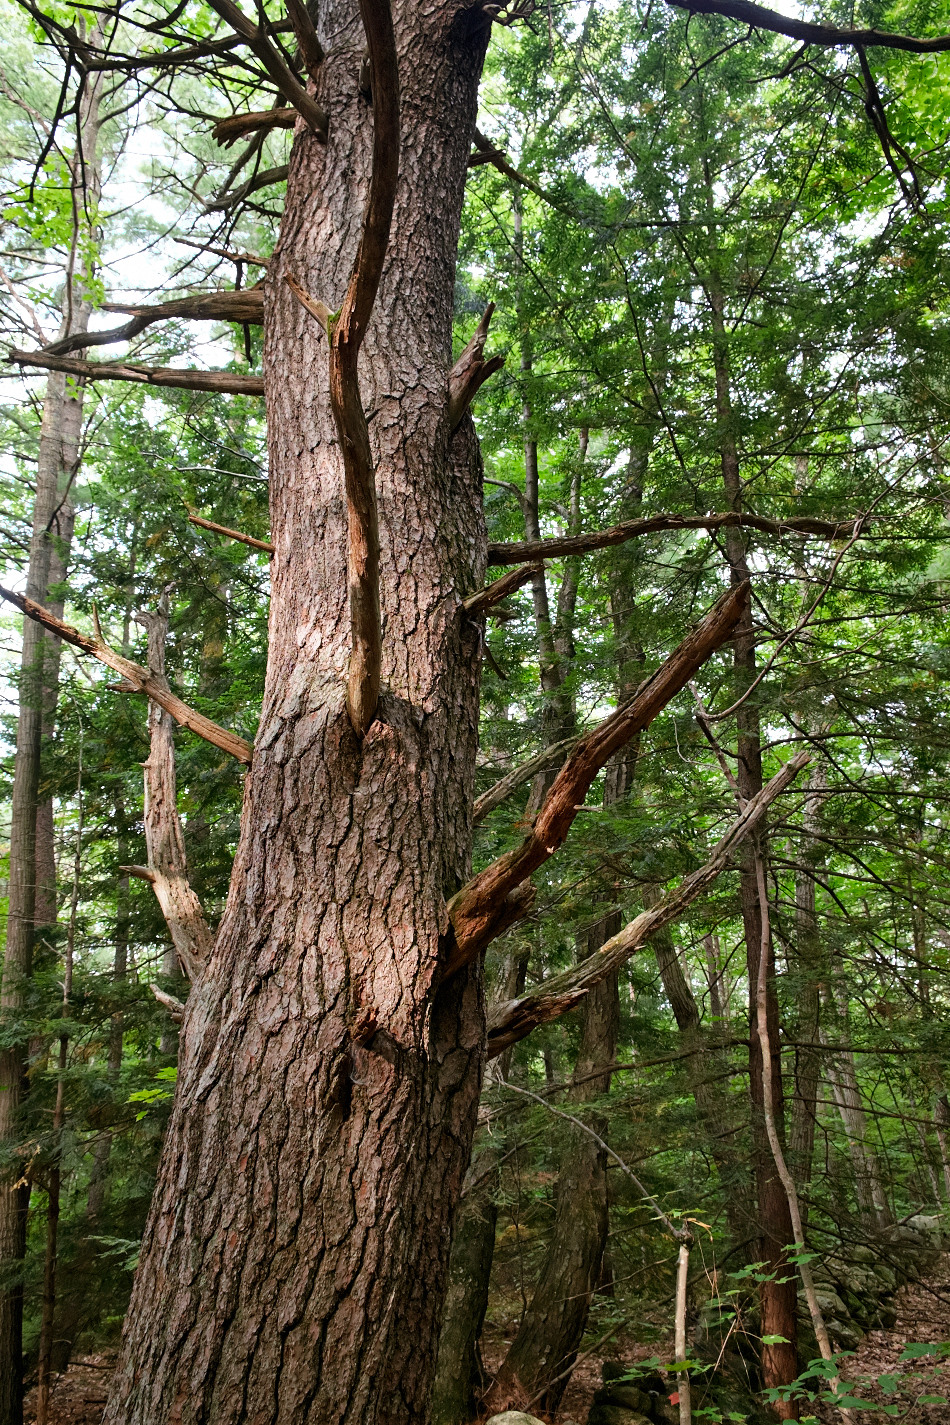 Color photo showing the broken limbs of a large white pine tree